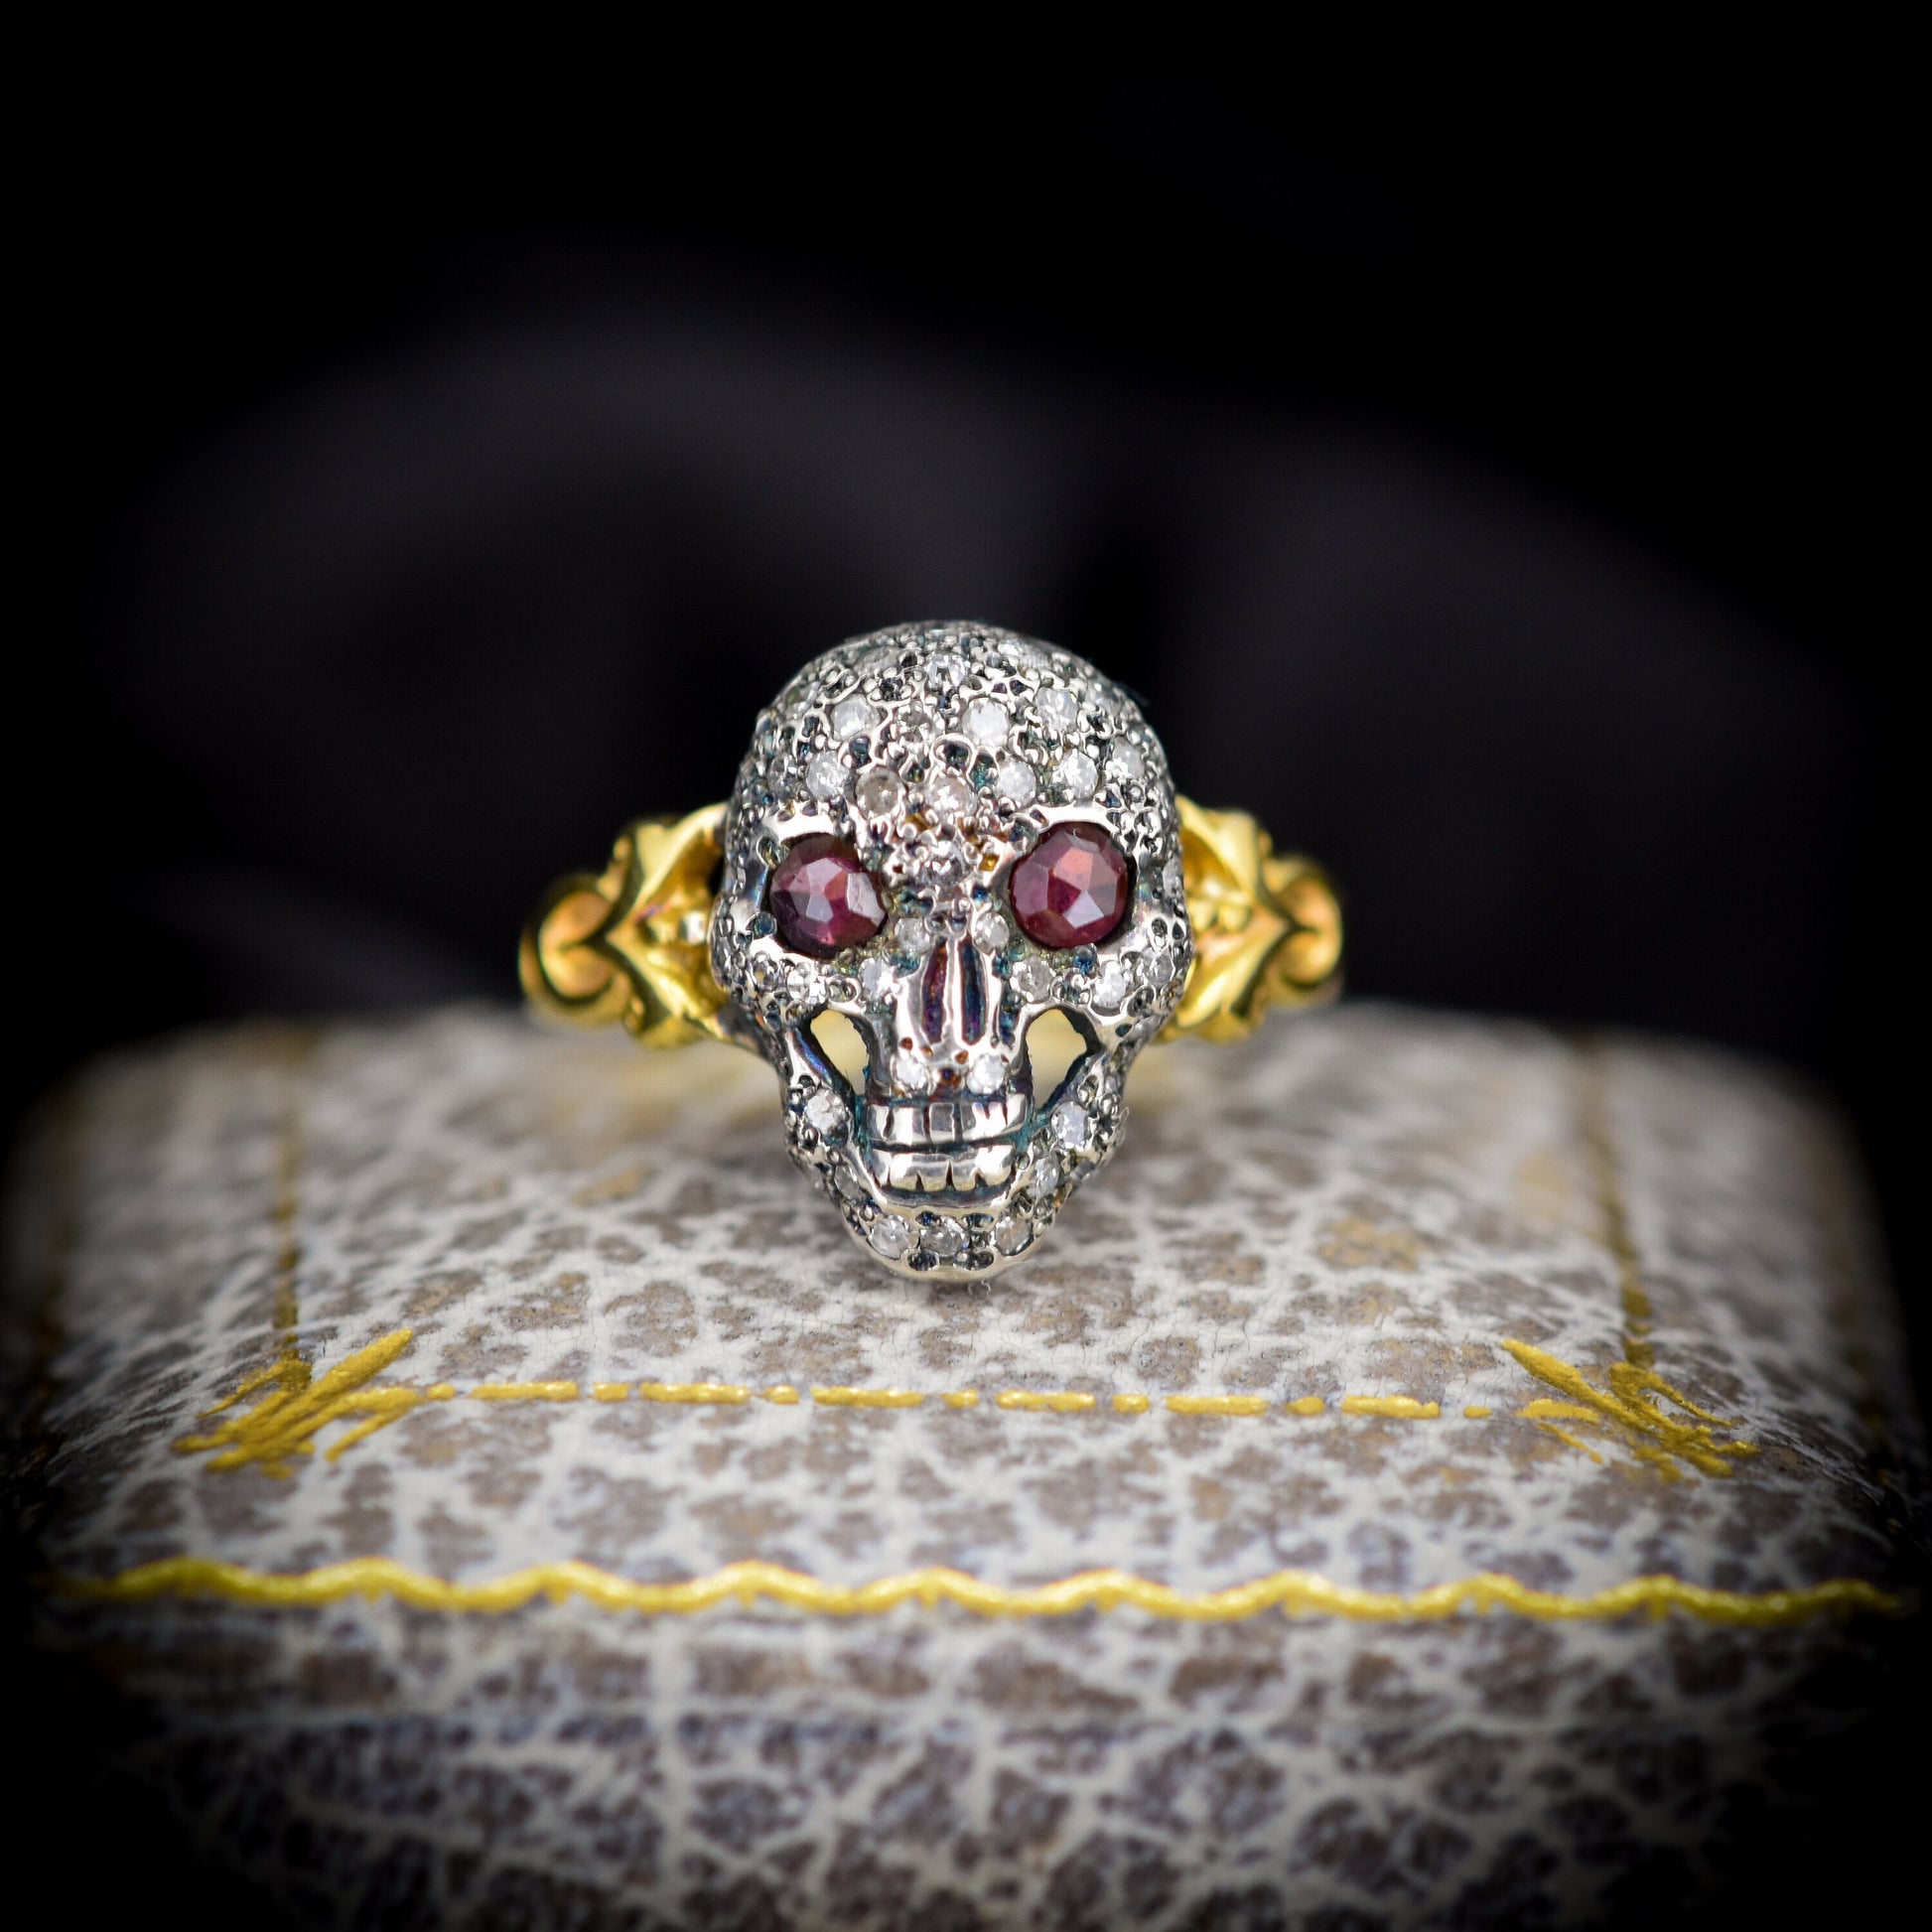 Diamond and Garnet Skull 18ct Yellow Gold and Silver Ring | Antique Style